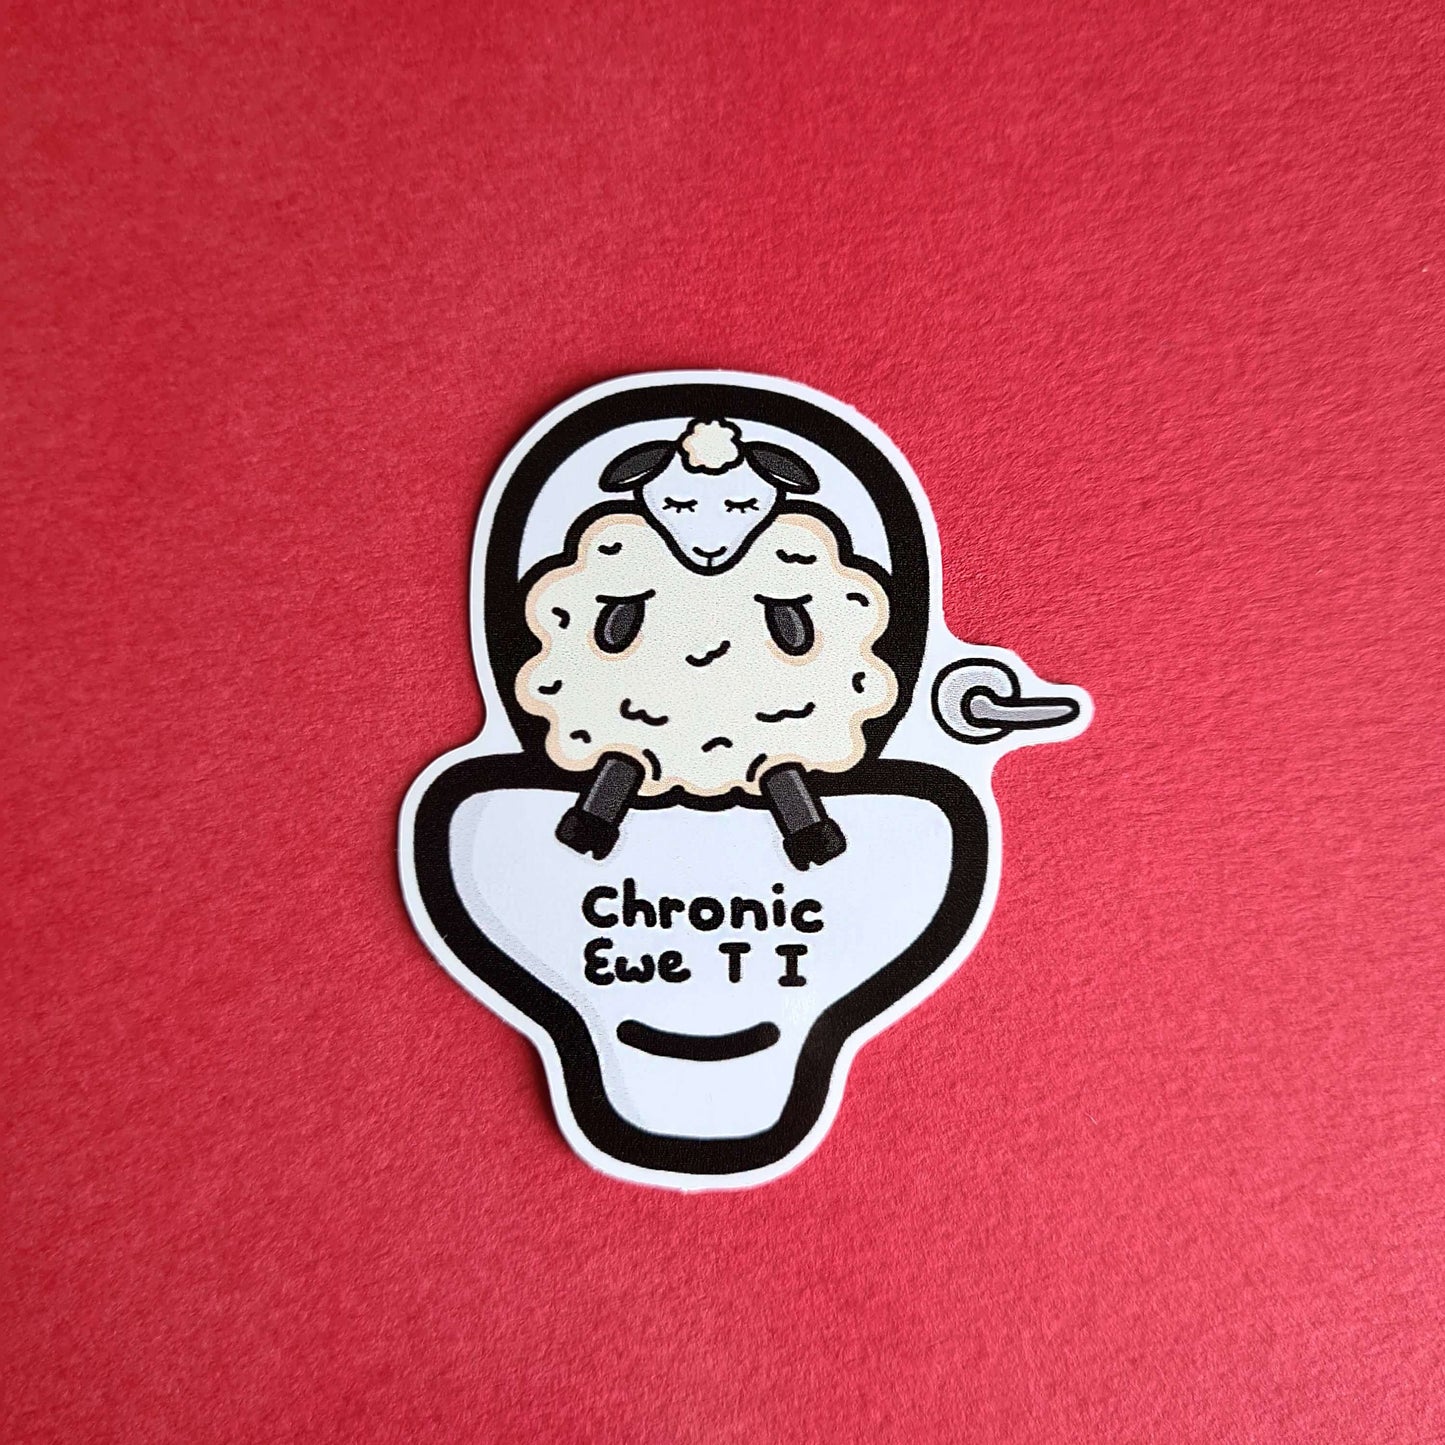 Chronic Ewe T I Sticker - Chronic UTI being held over a red background. The sticker features a white sad sheep sat on a large white toilet with black text reading chronic ewe T I. The design is raising awareness for chronic utis.